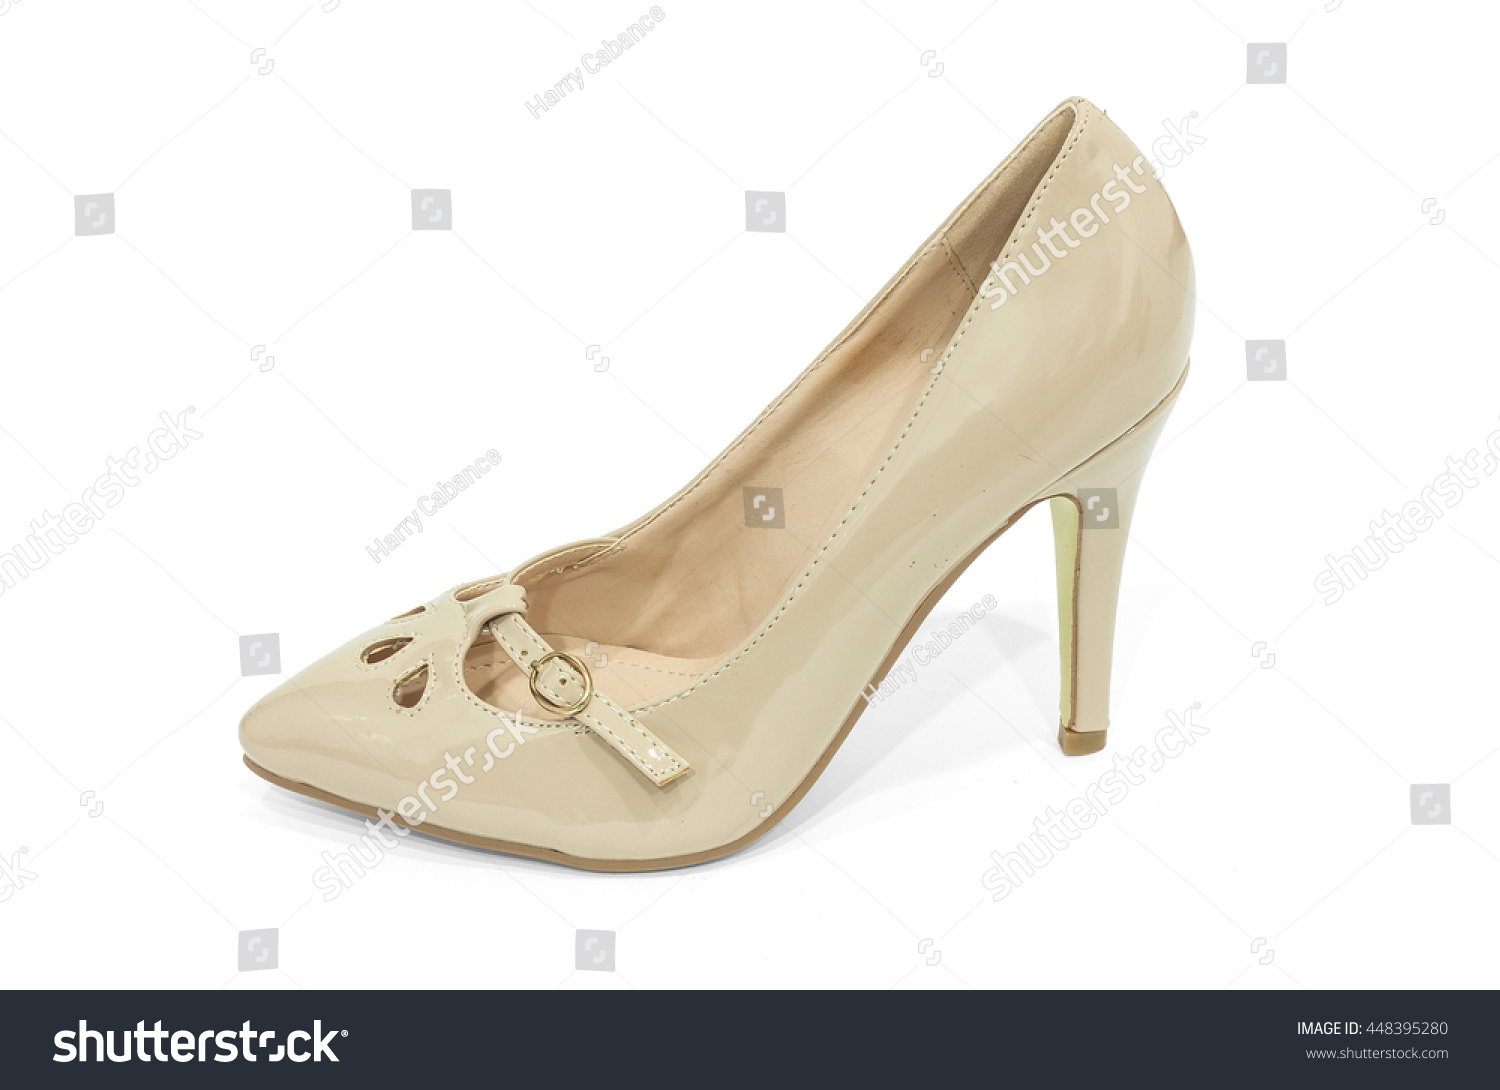 Ladies Cream Colored High Heels Shoes 